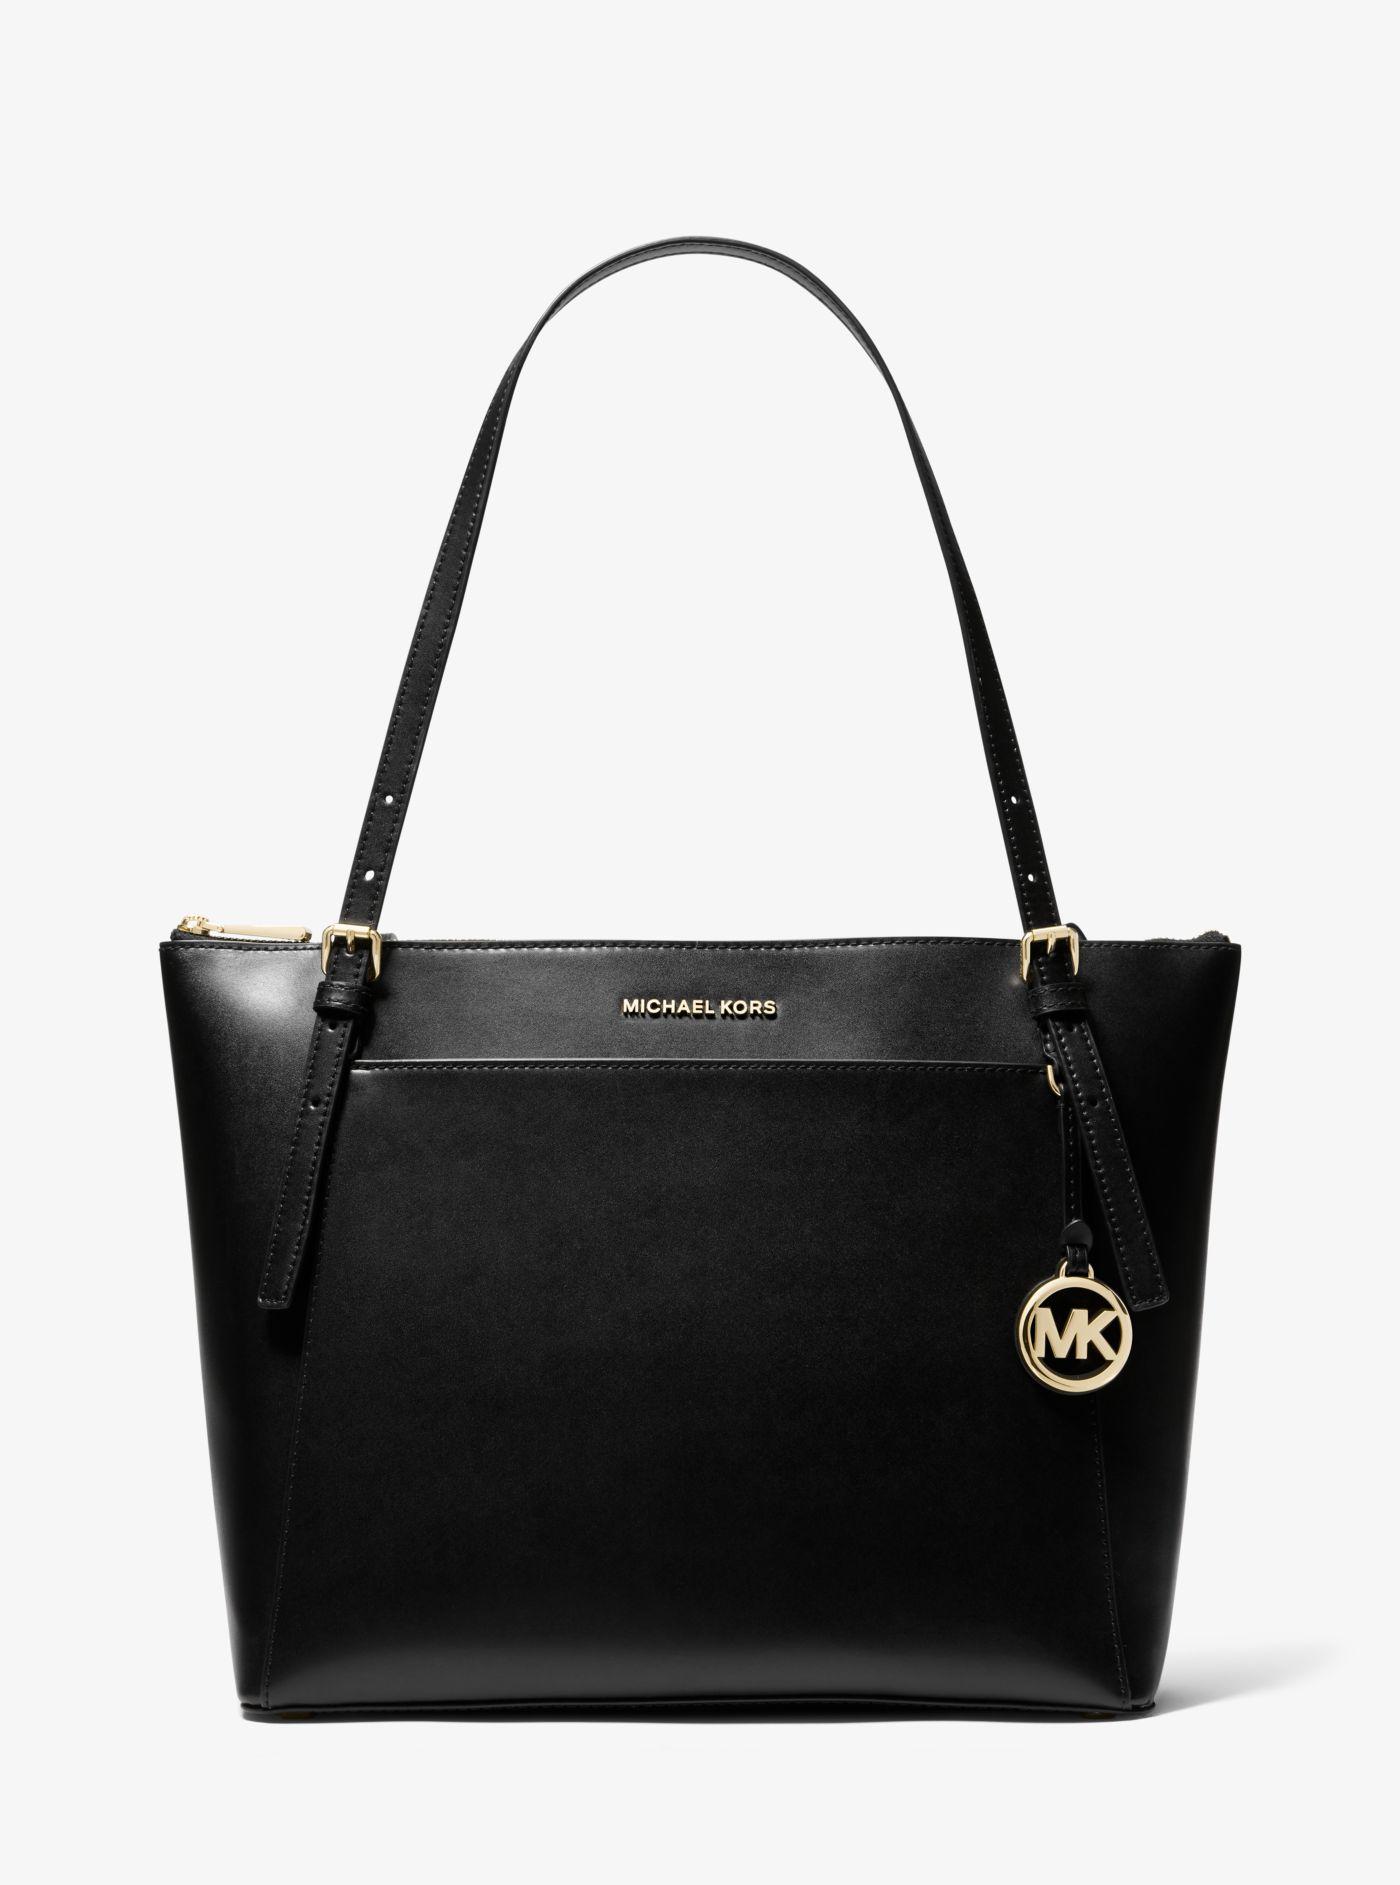 Michael Kors Voyager Large Leather Tote Bag in Black | Lyst